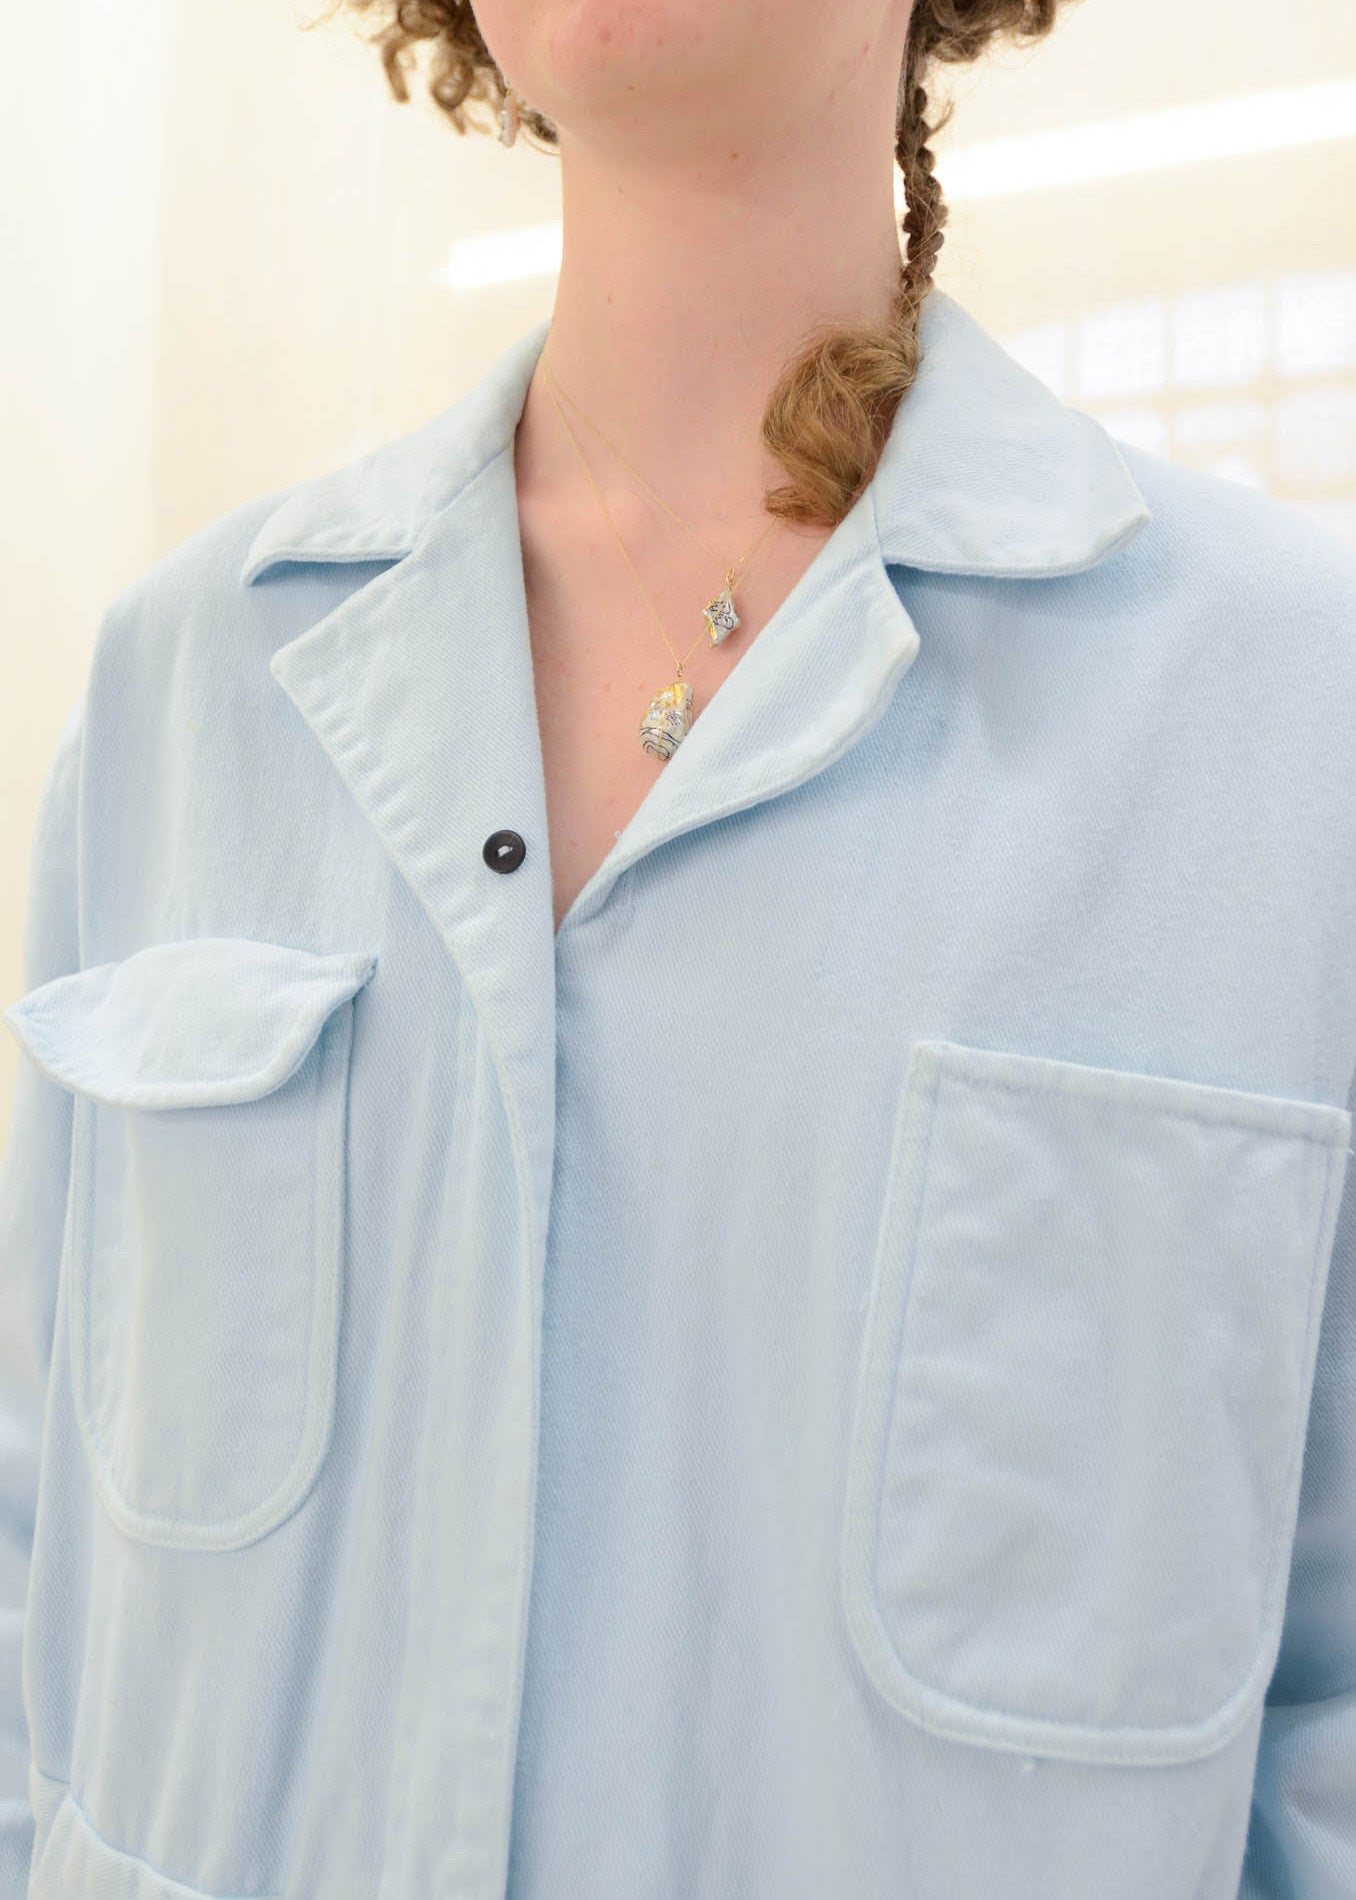 WorkSuit (Cotton Twill limited Baby blue  jumpsuit)